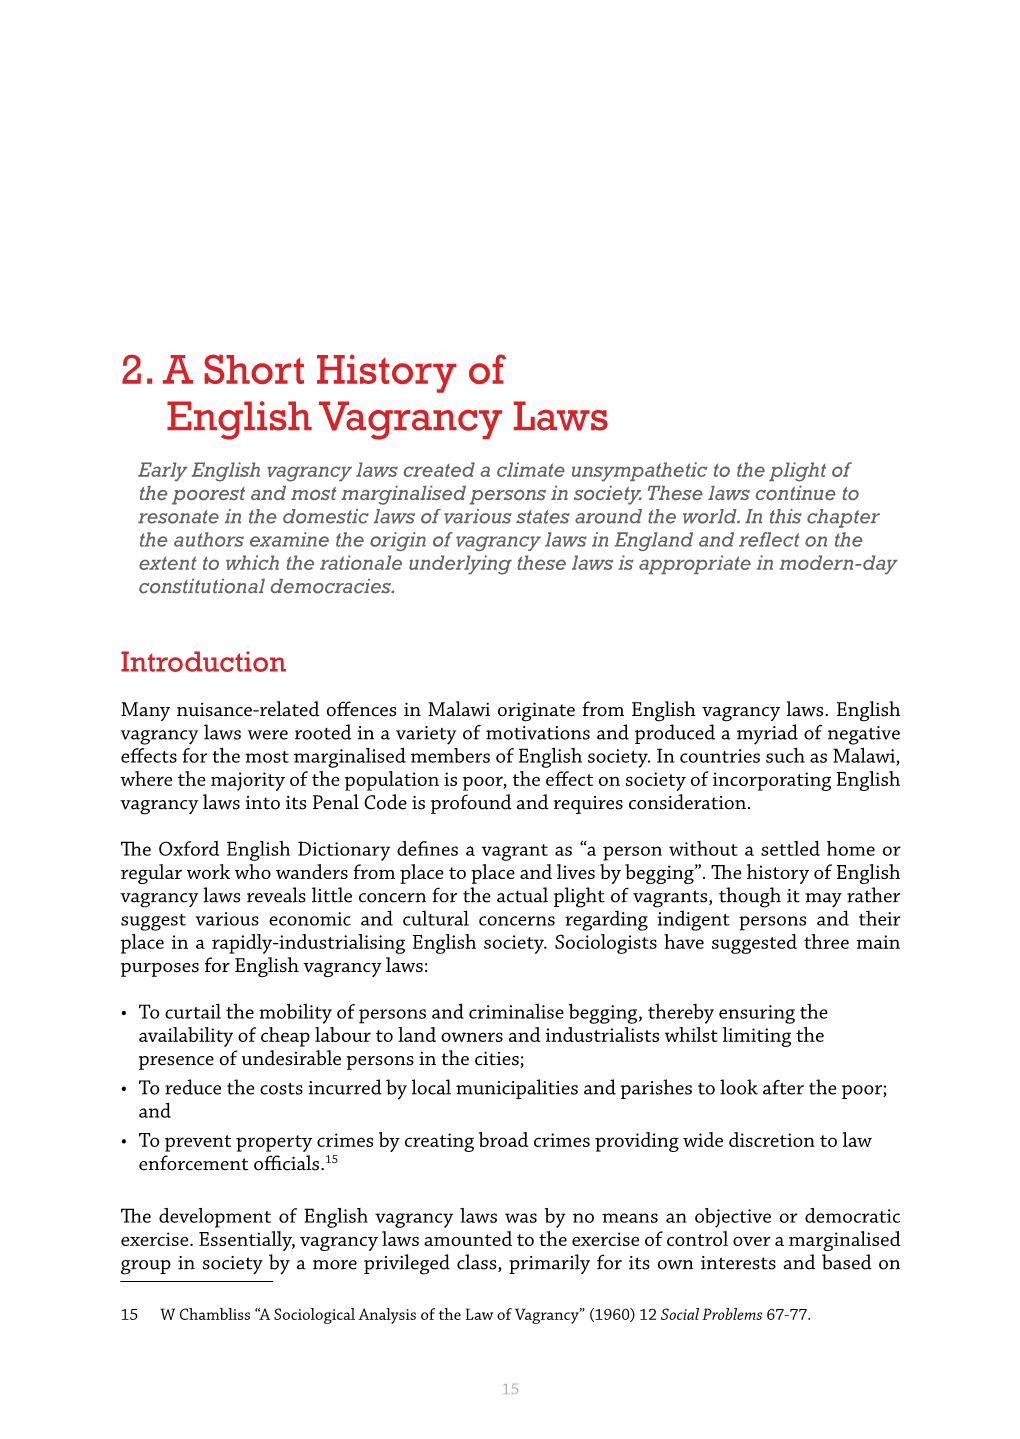 2. a Short History of English Vagrancy Laws